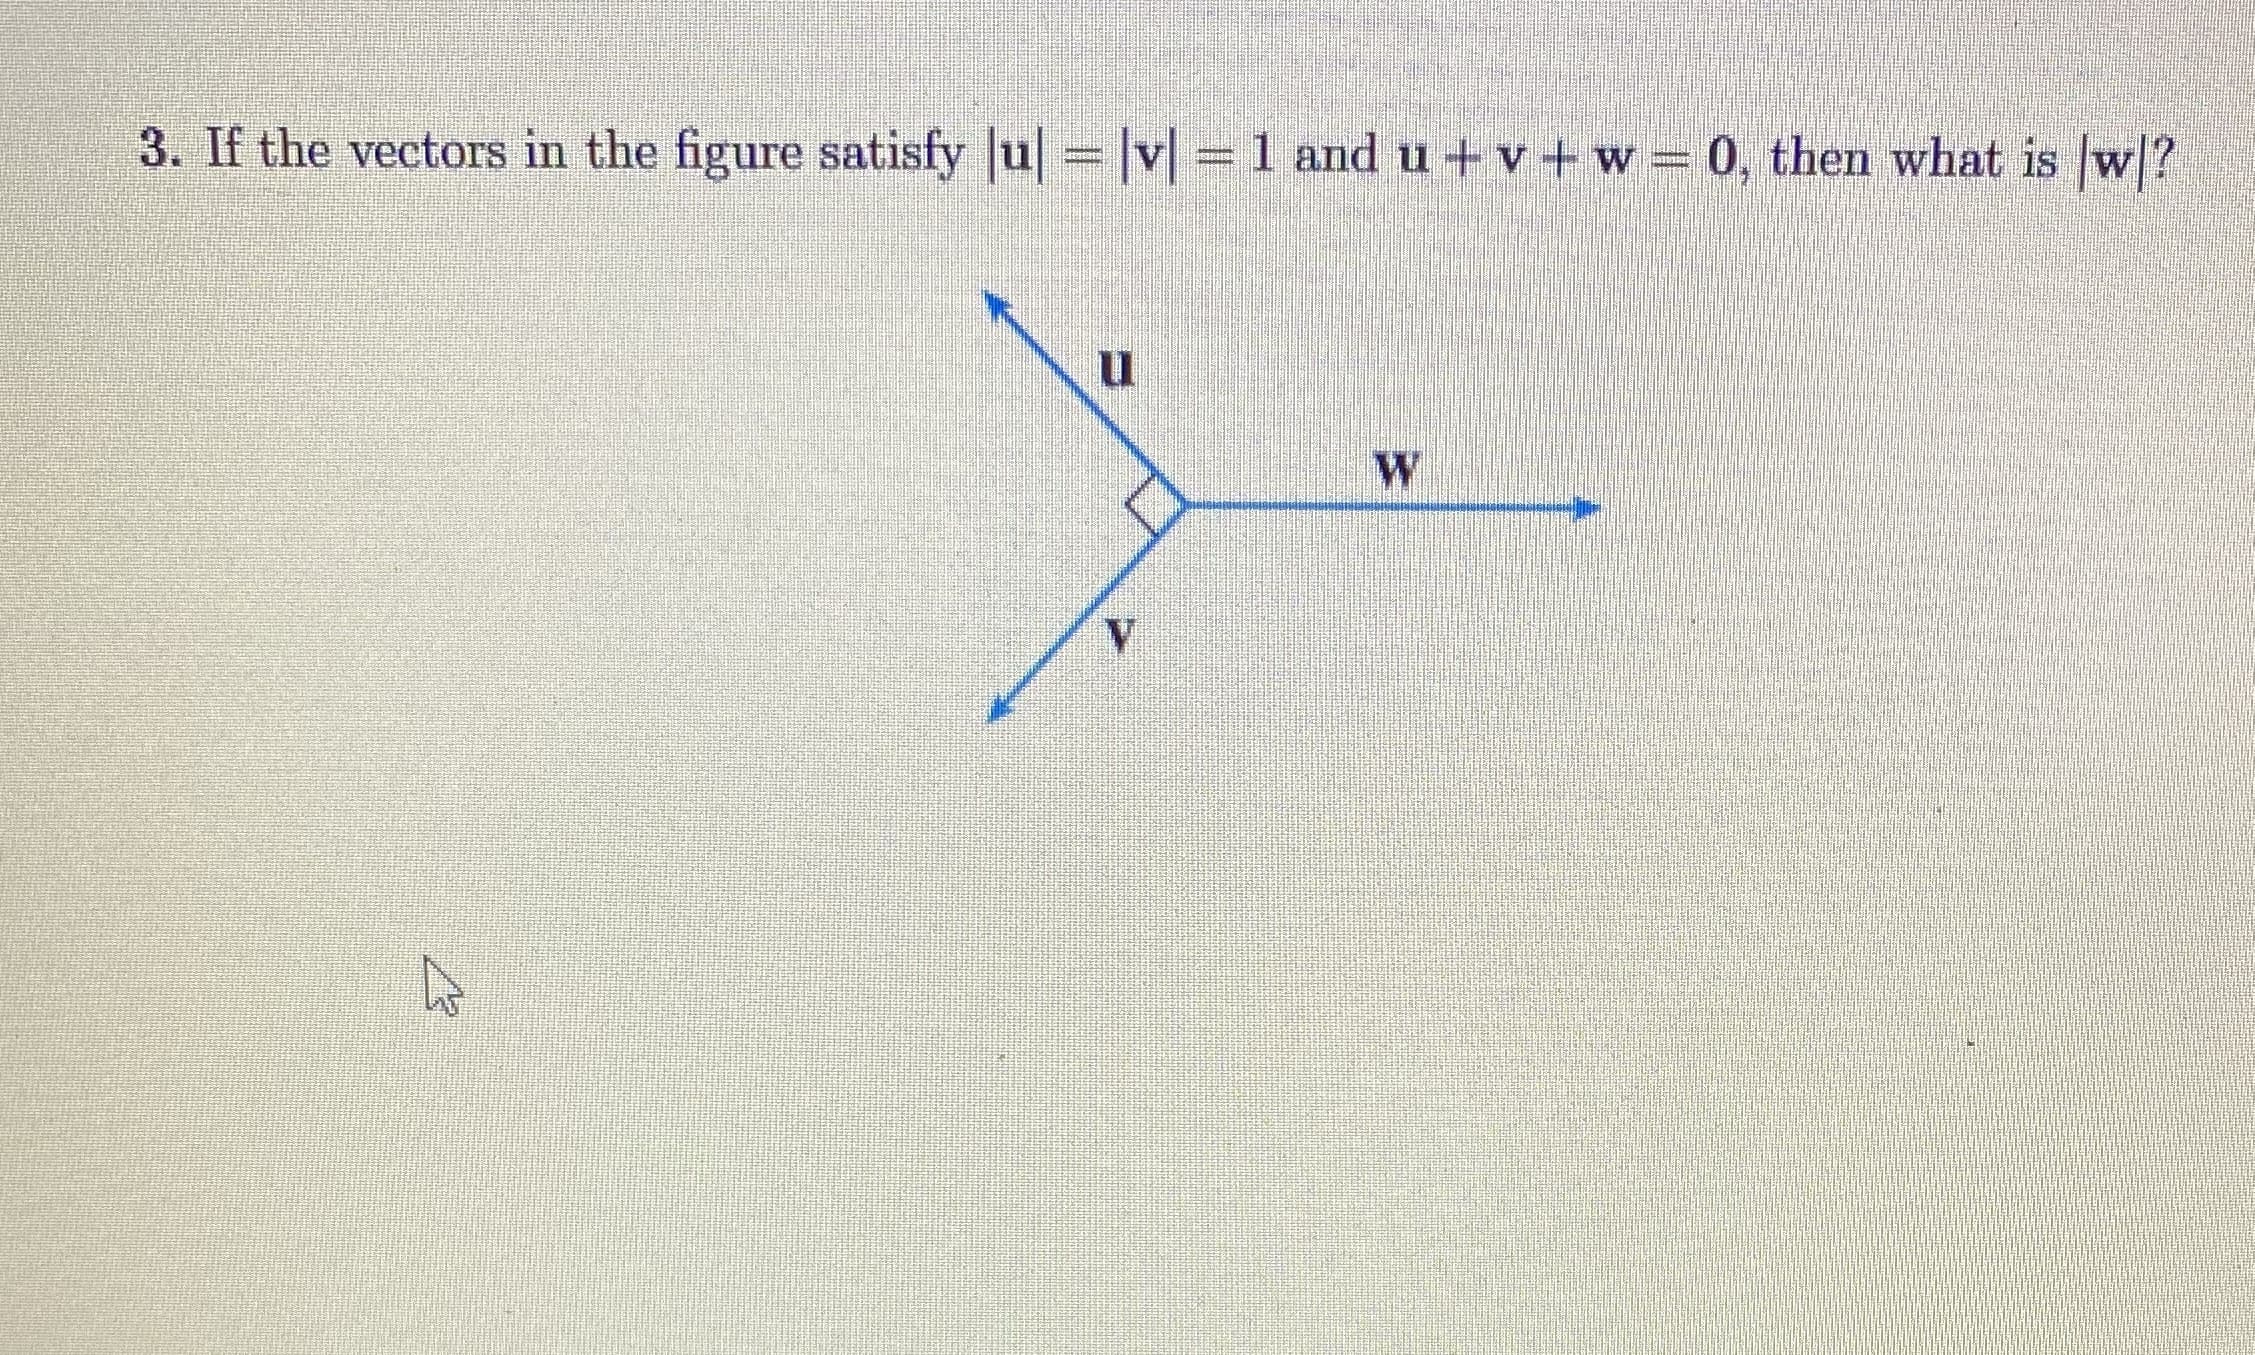 W
If the vectors in the figure satisfy u= |v=1 and u + v +w = 0, then what is w?
